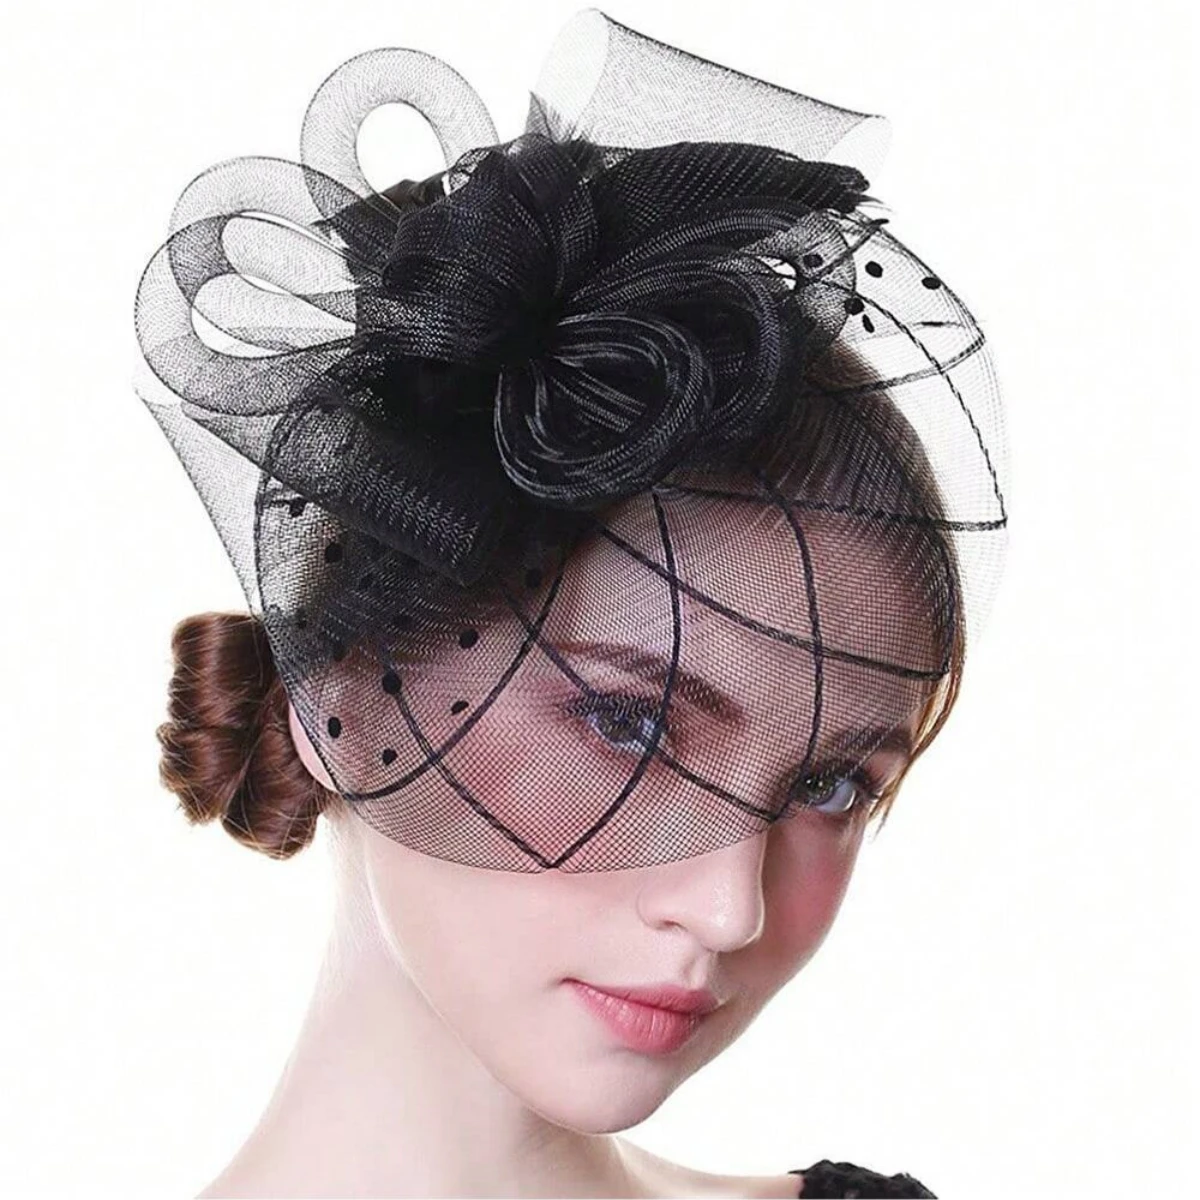 Women's Headwear Tea Party Church Wedding Mesh Cocktail Party Flower Feather Charming Clip Christmas Party Hair Accessories New